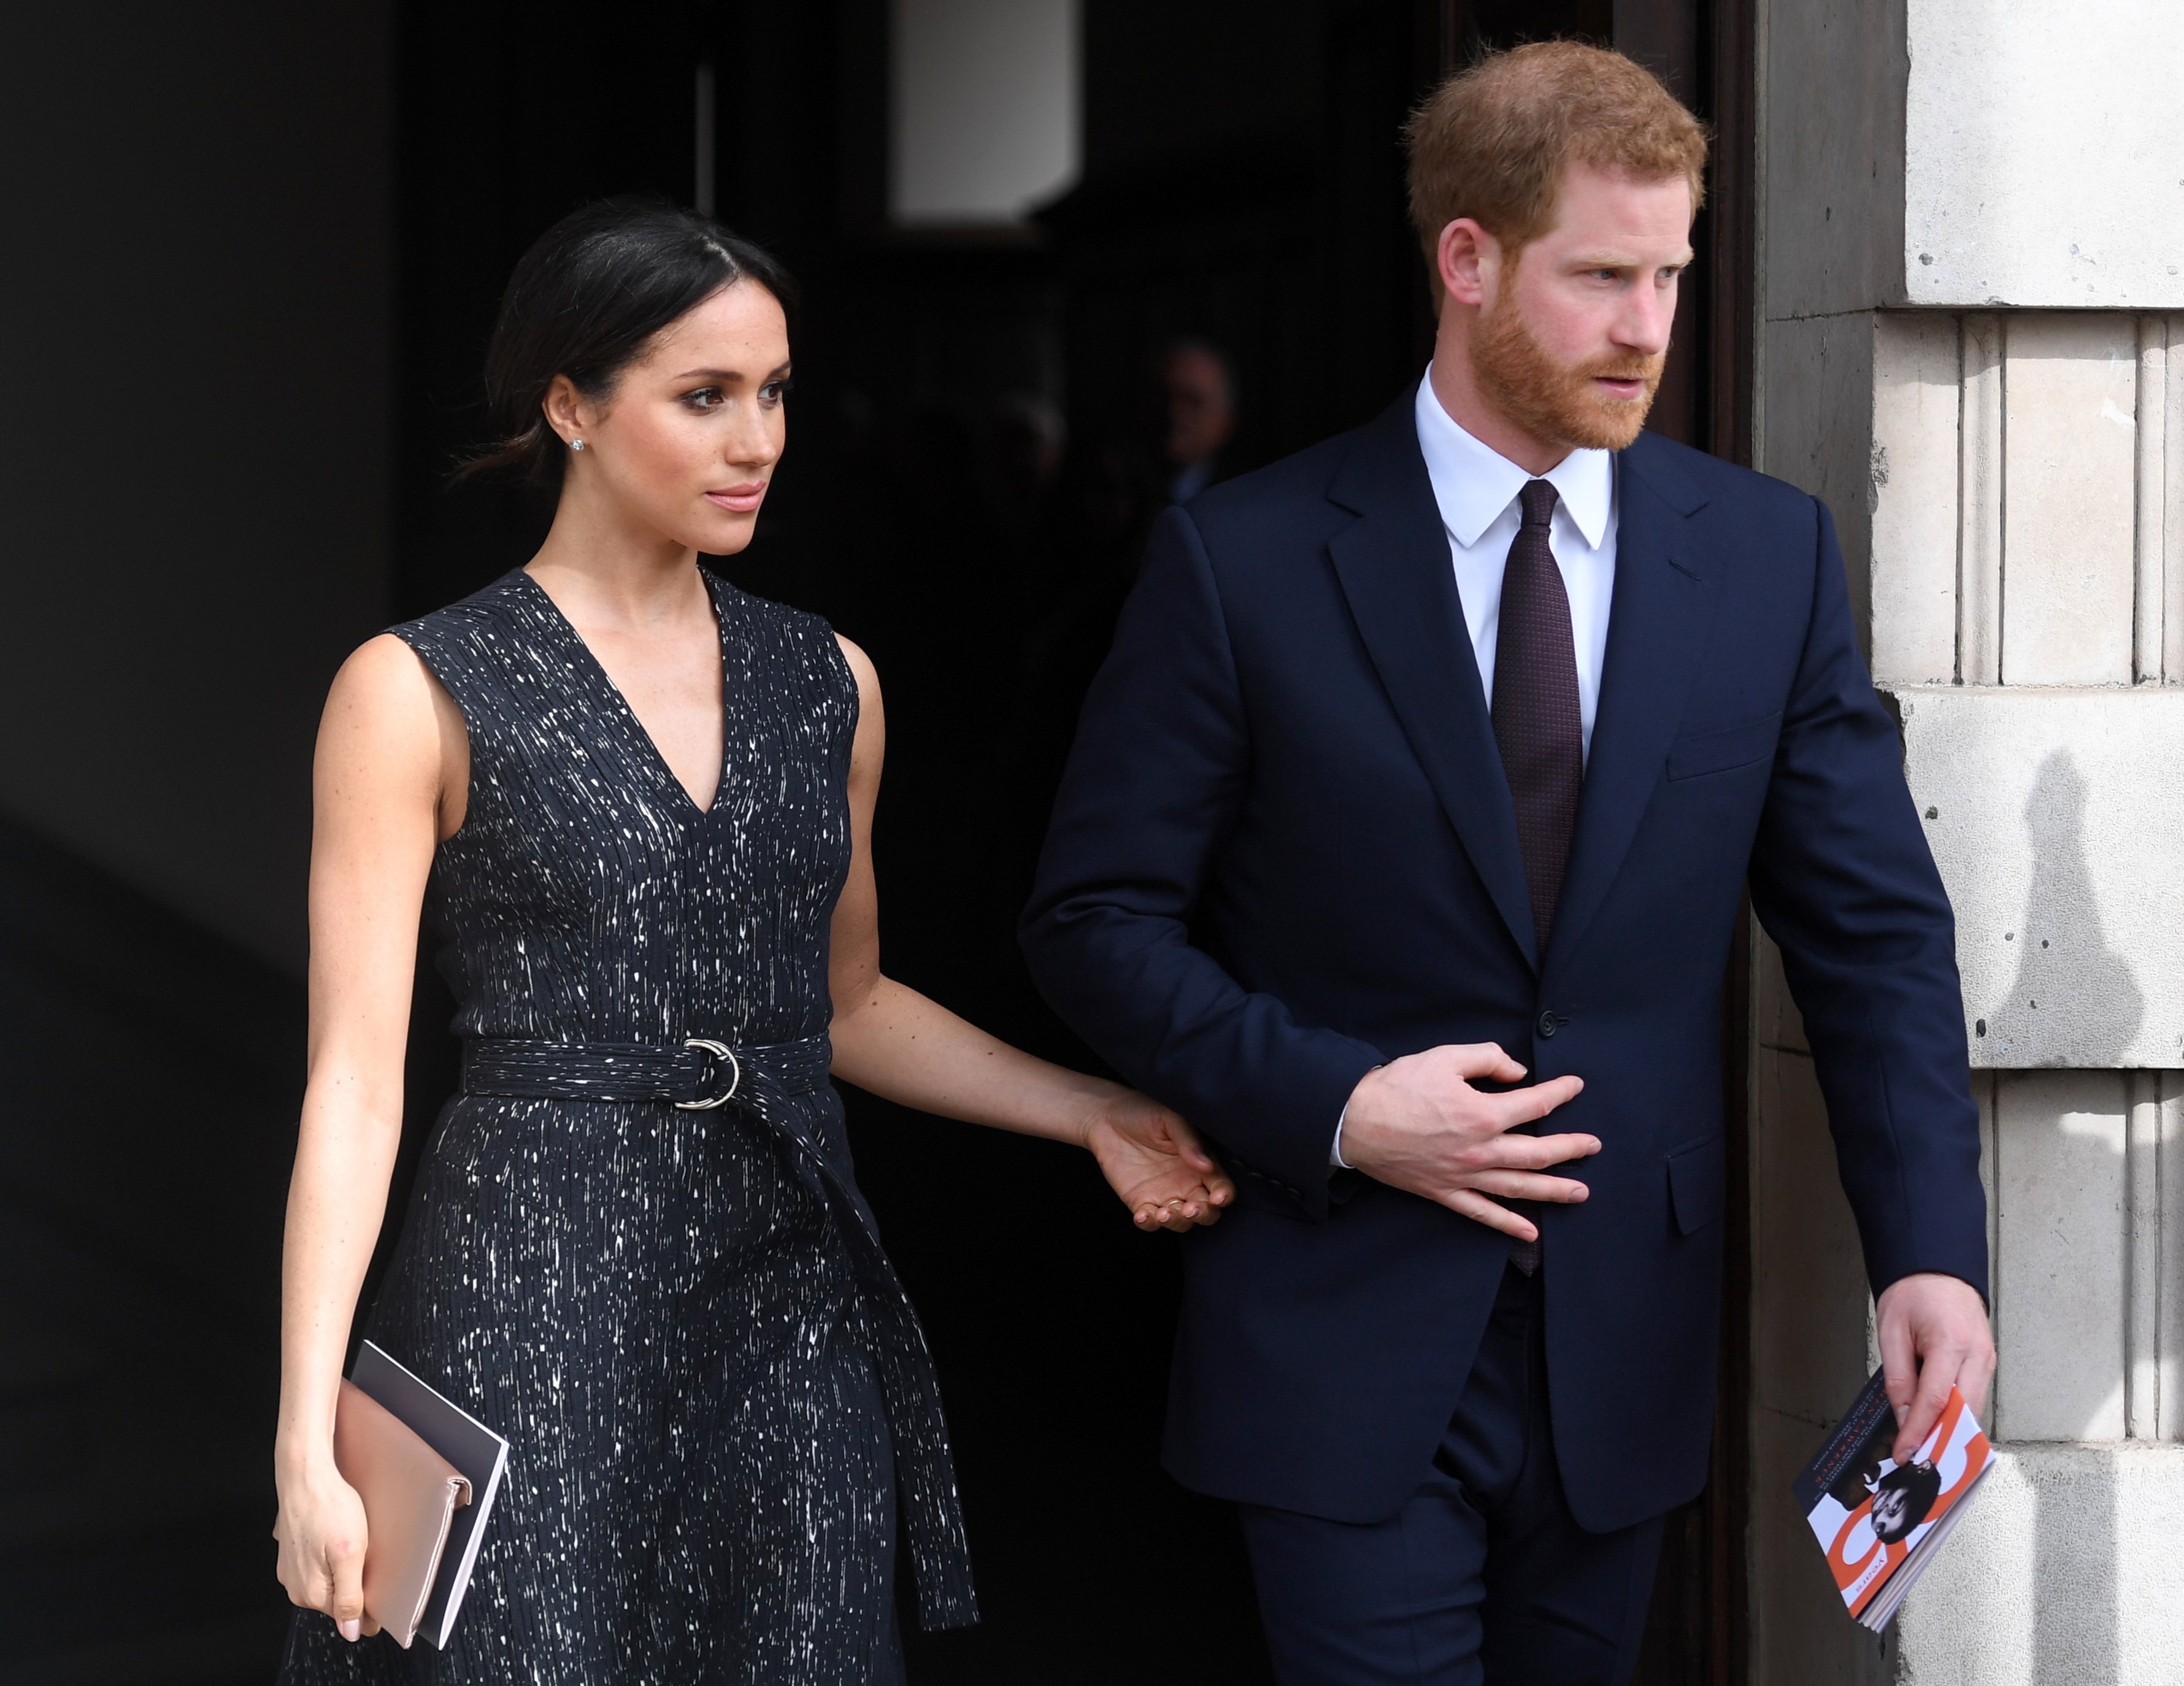 Meghan Markle making a subtle hand gesture toward Prince Harry as they exit a memorial service with months before their Oprah interview